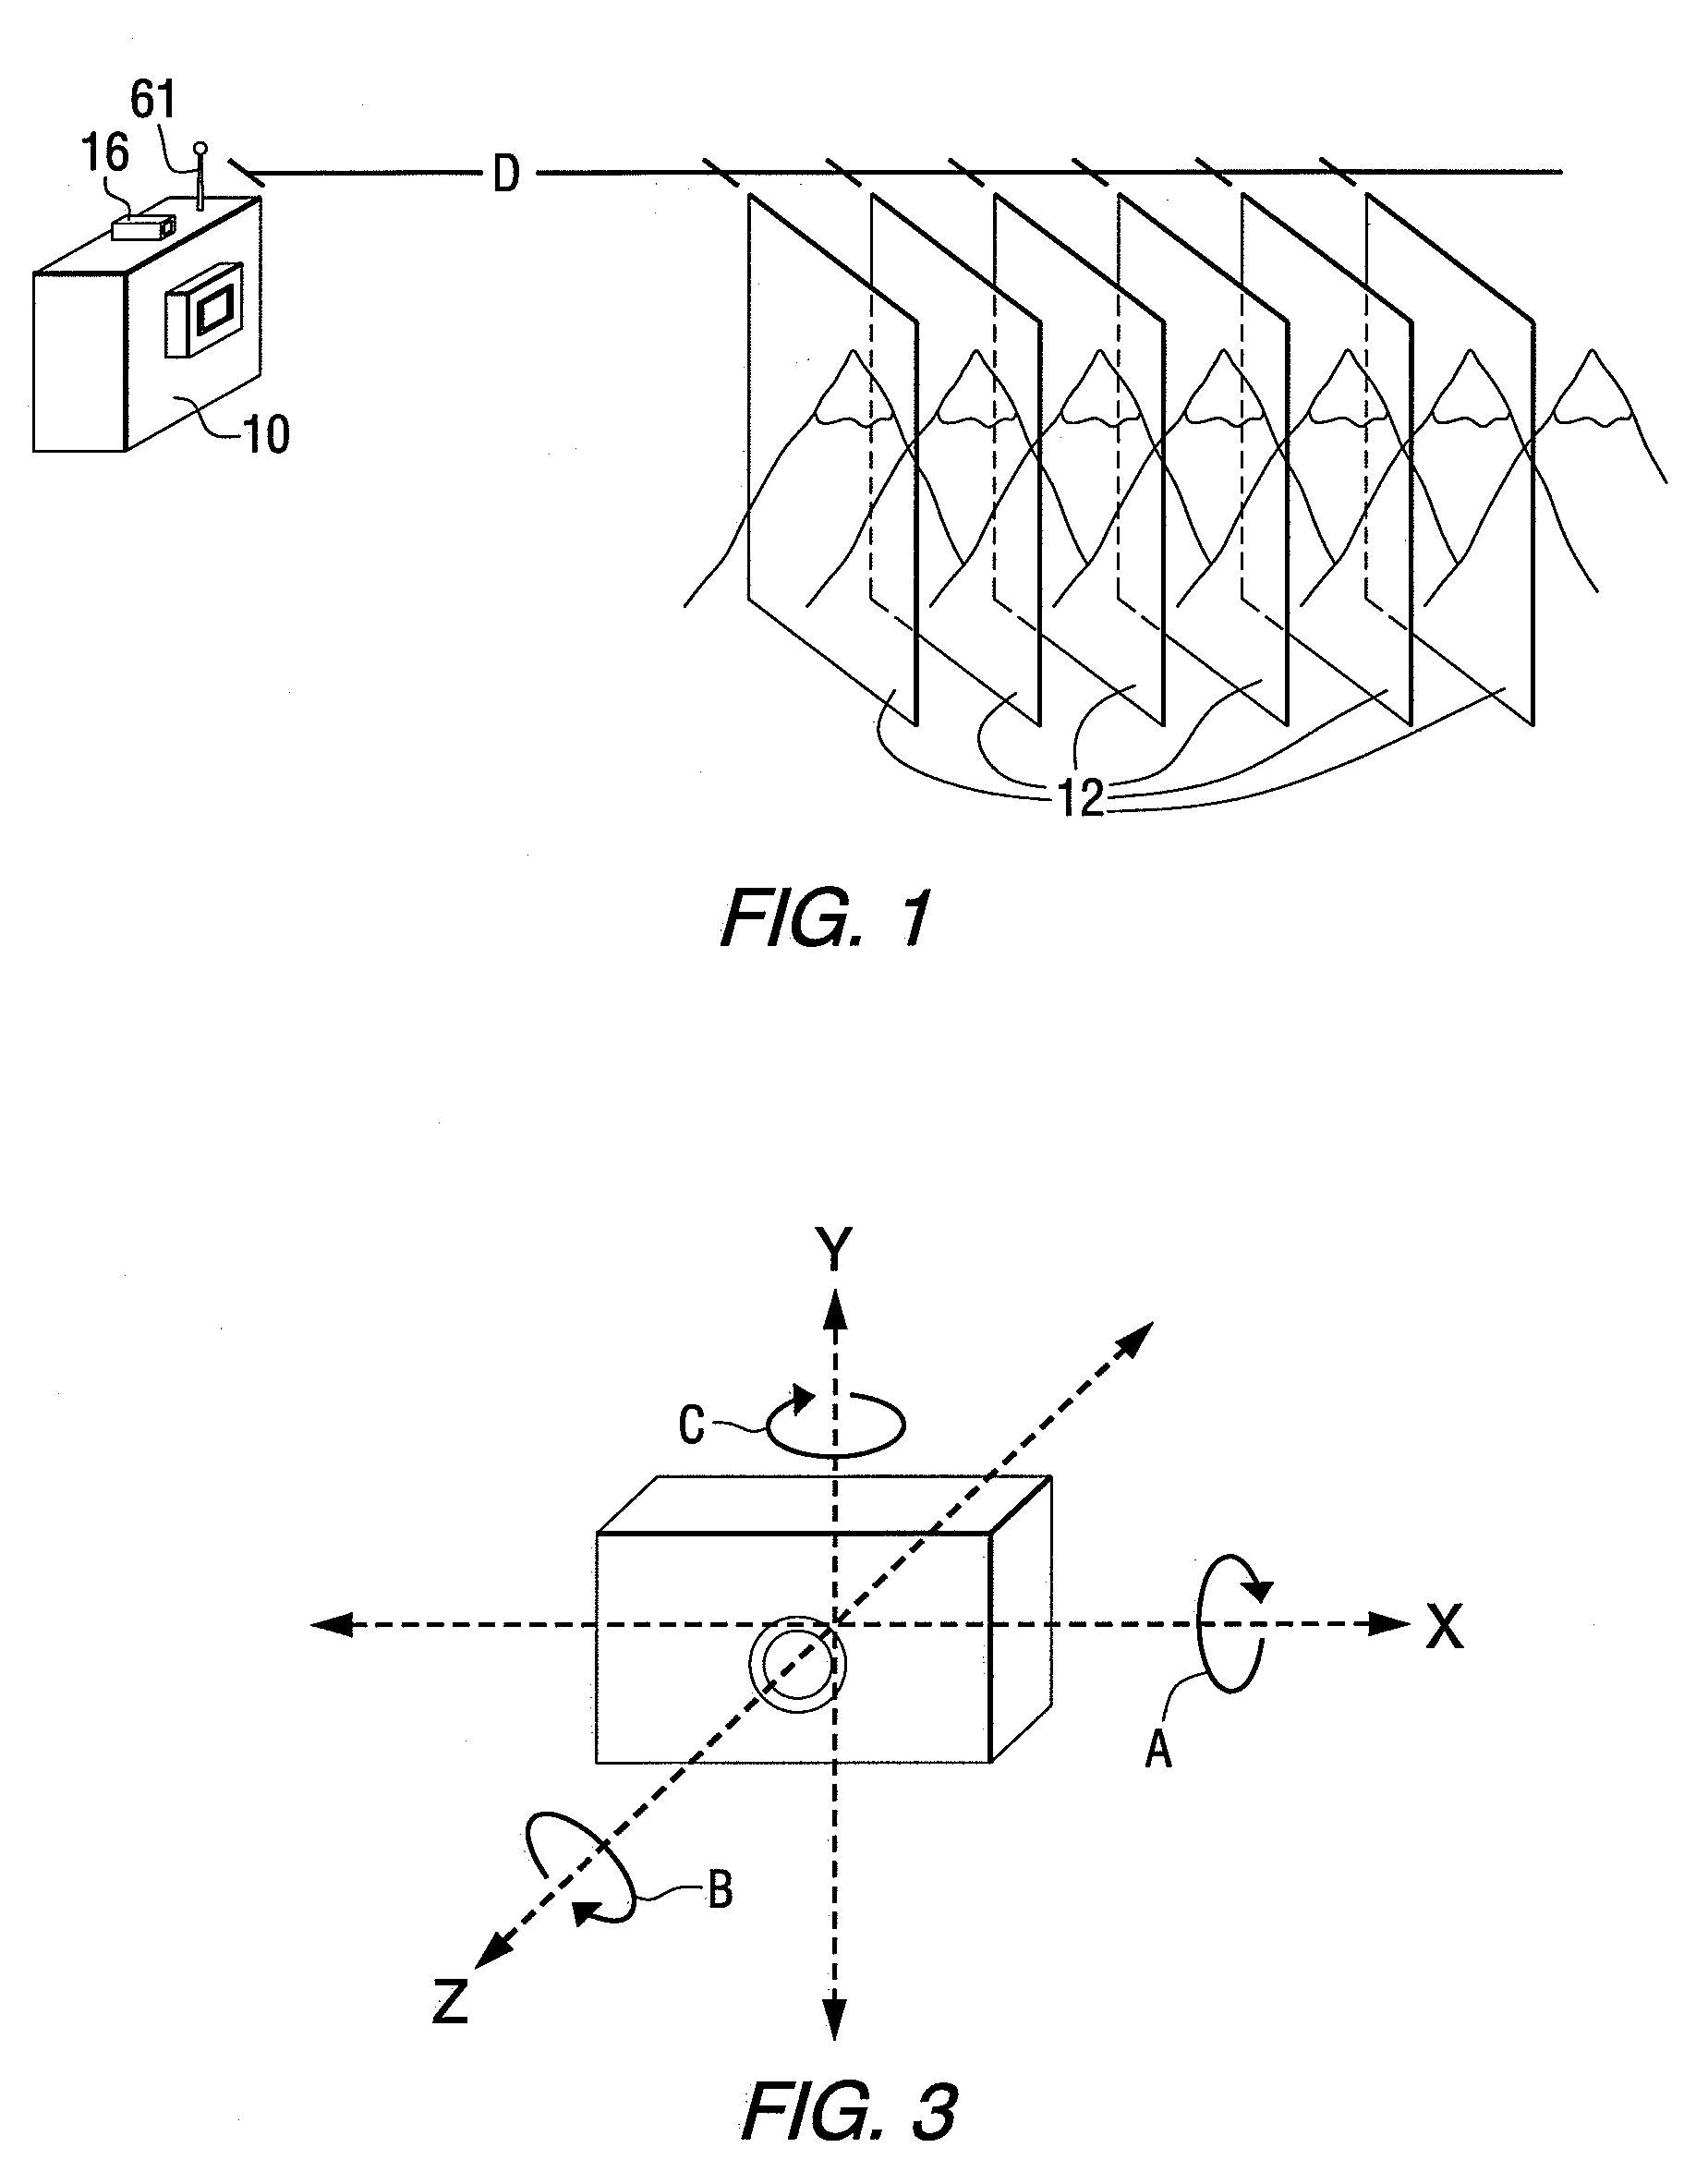 Method for infrared imaging of living or non-living objects including terrains that are either natural or manmade